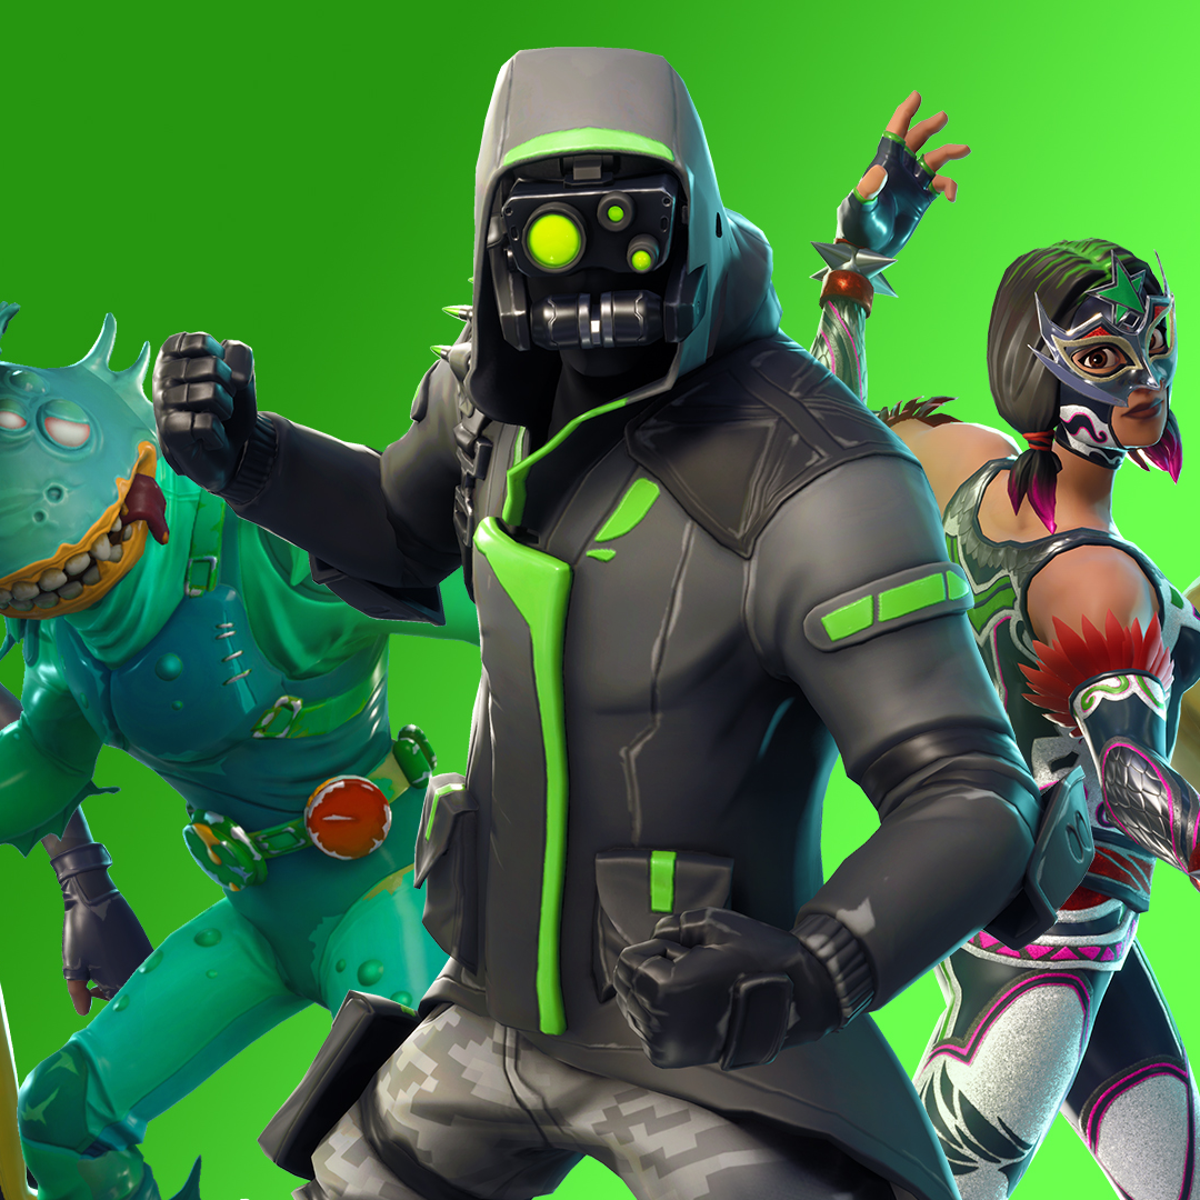 Fortnite v8.10 update adds The Baller, The Getaway LTM, Wooden Lodge  Creative theme and reduces number of player islands on each server